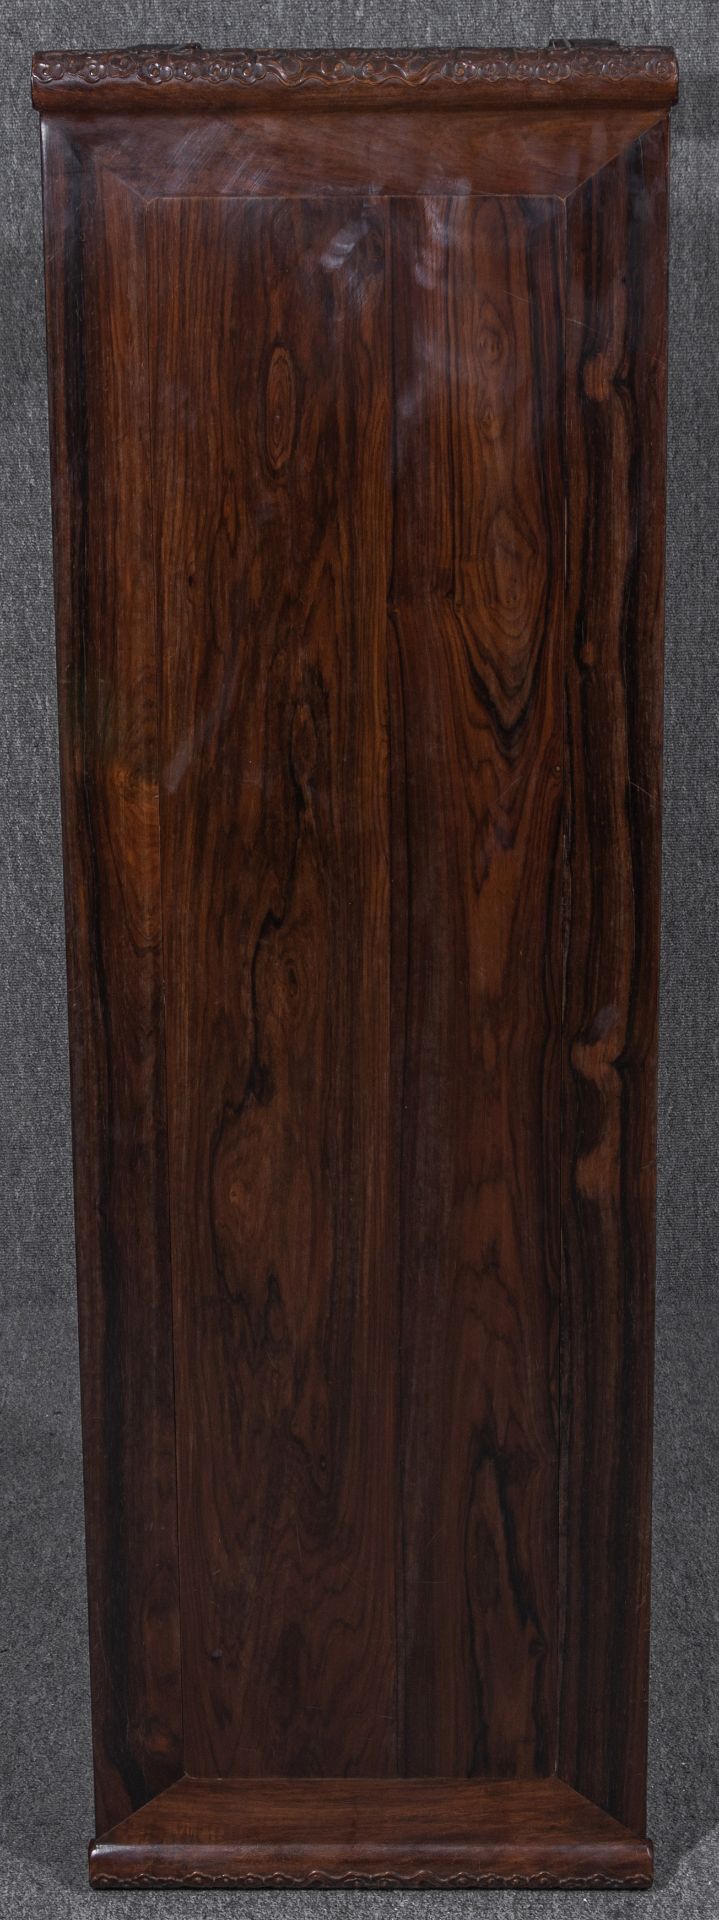 Chinese Qing Dynasty rosewood desk - Image 8 of 10